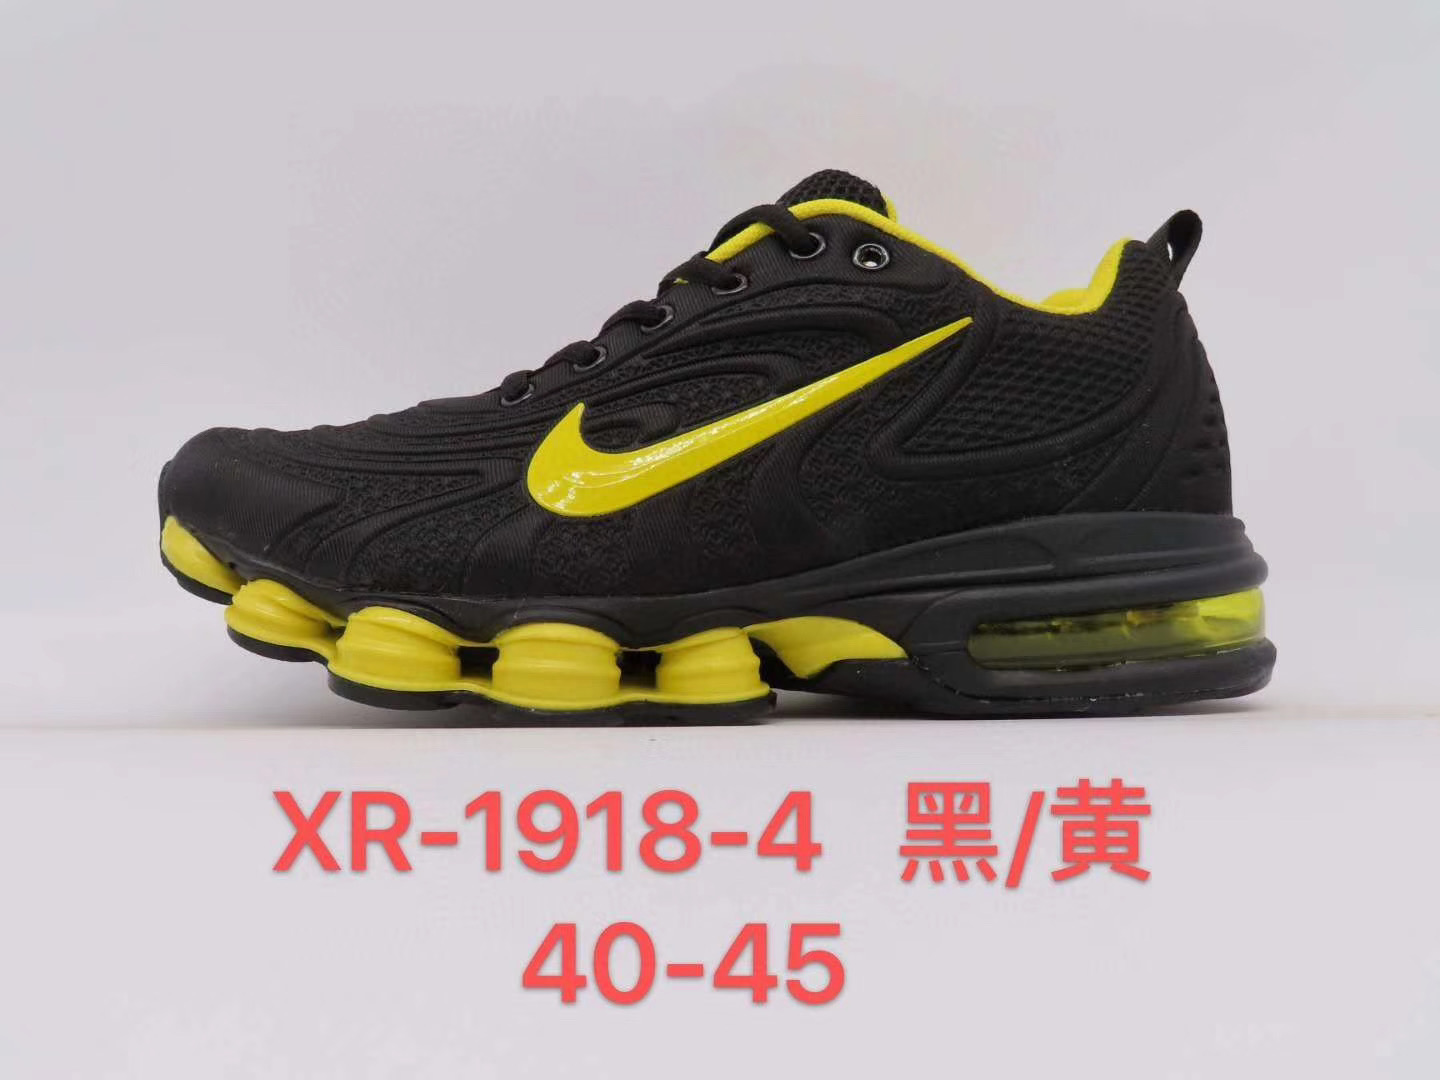 Nike Air Max 2019.6 Voyager Black Yellow Shoes